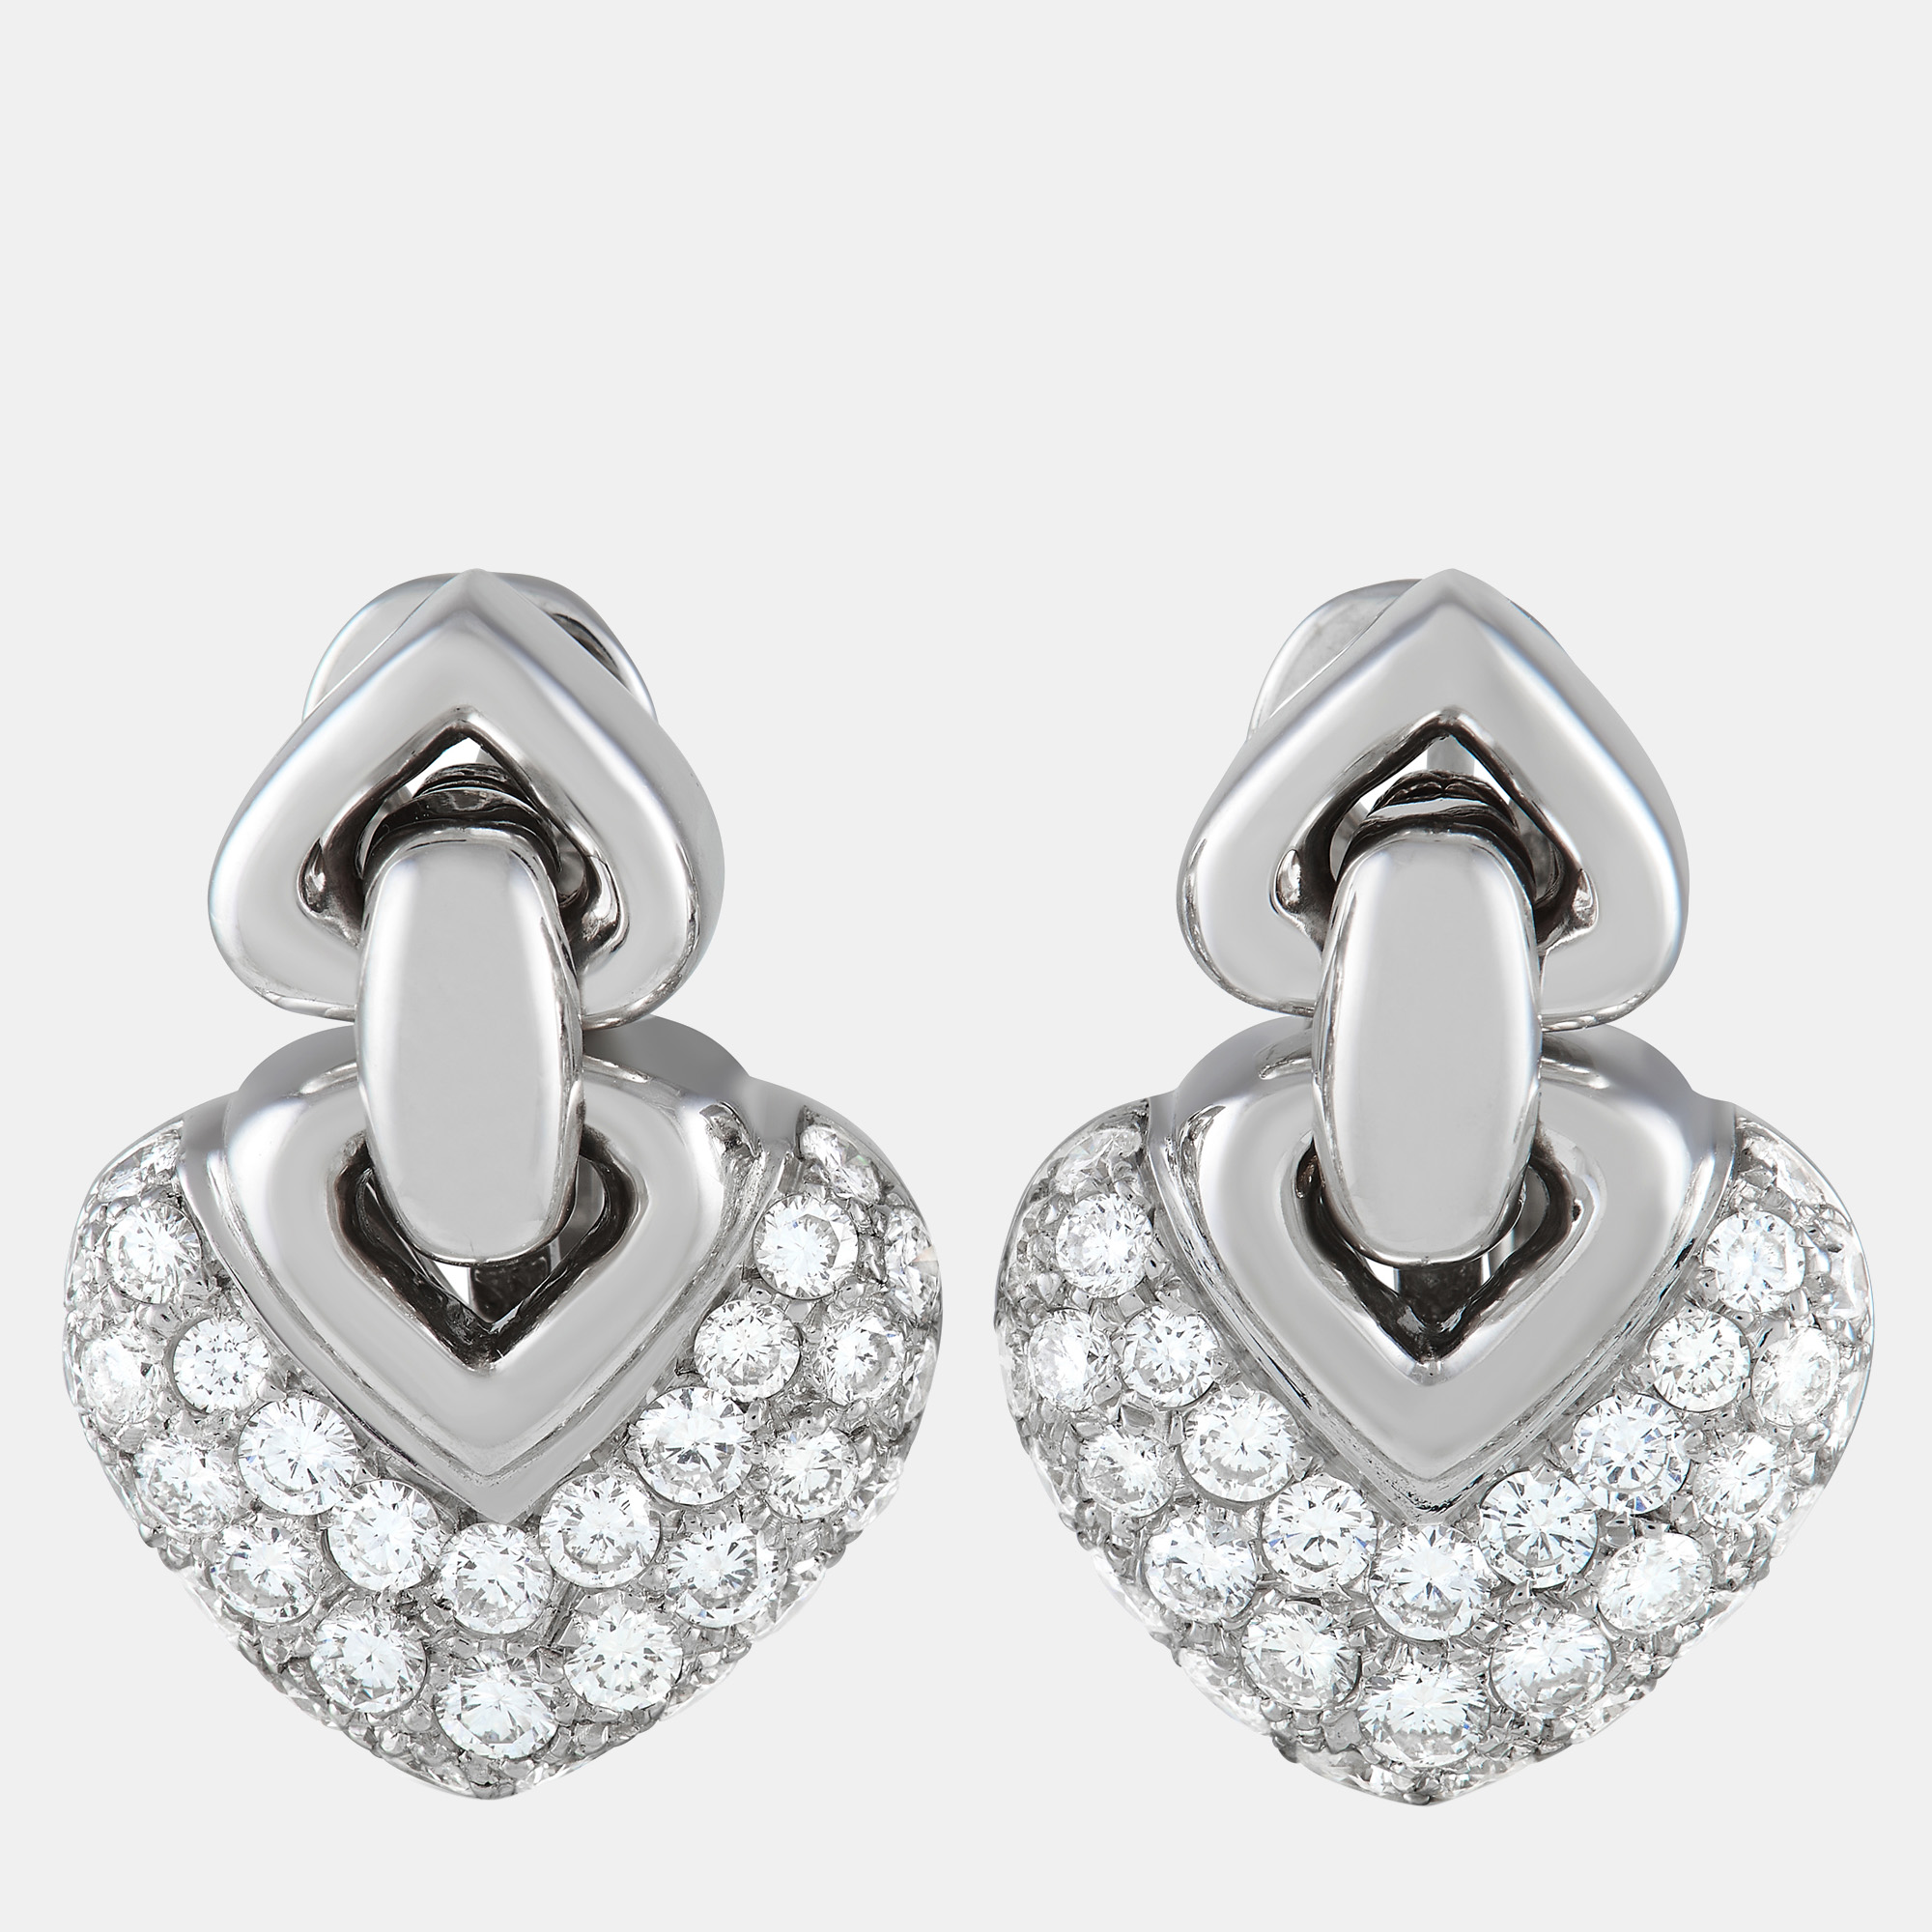 These Bvlgari Doppio Cuore earrings feature a dangling heartshaped motif covered in pavx E9 diamonds totaling 2.25 carats. Stylish and sophisticated in design they crafted from 18K White Gold for a touch of extra shimmer. Each one measures 1.0 long and 0.65 wide.